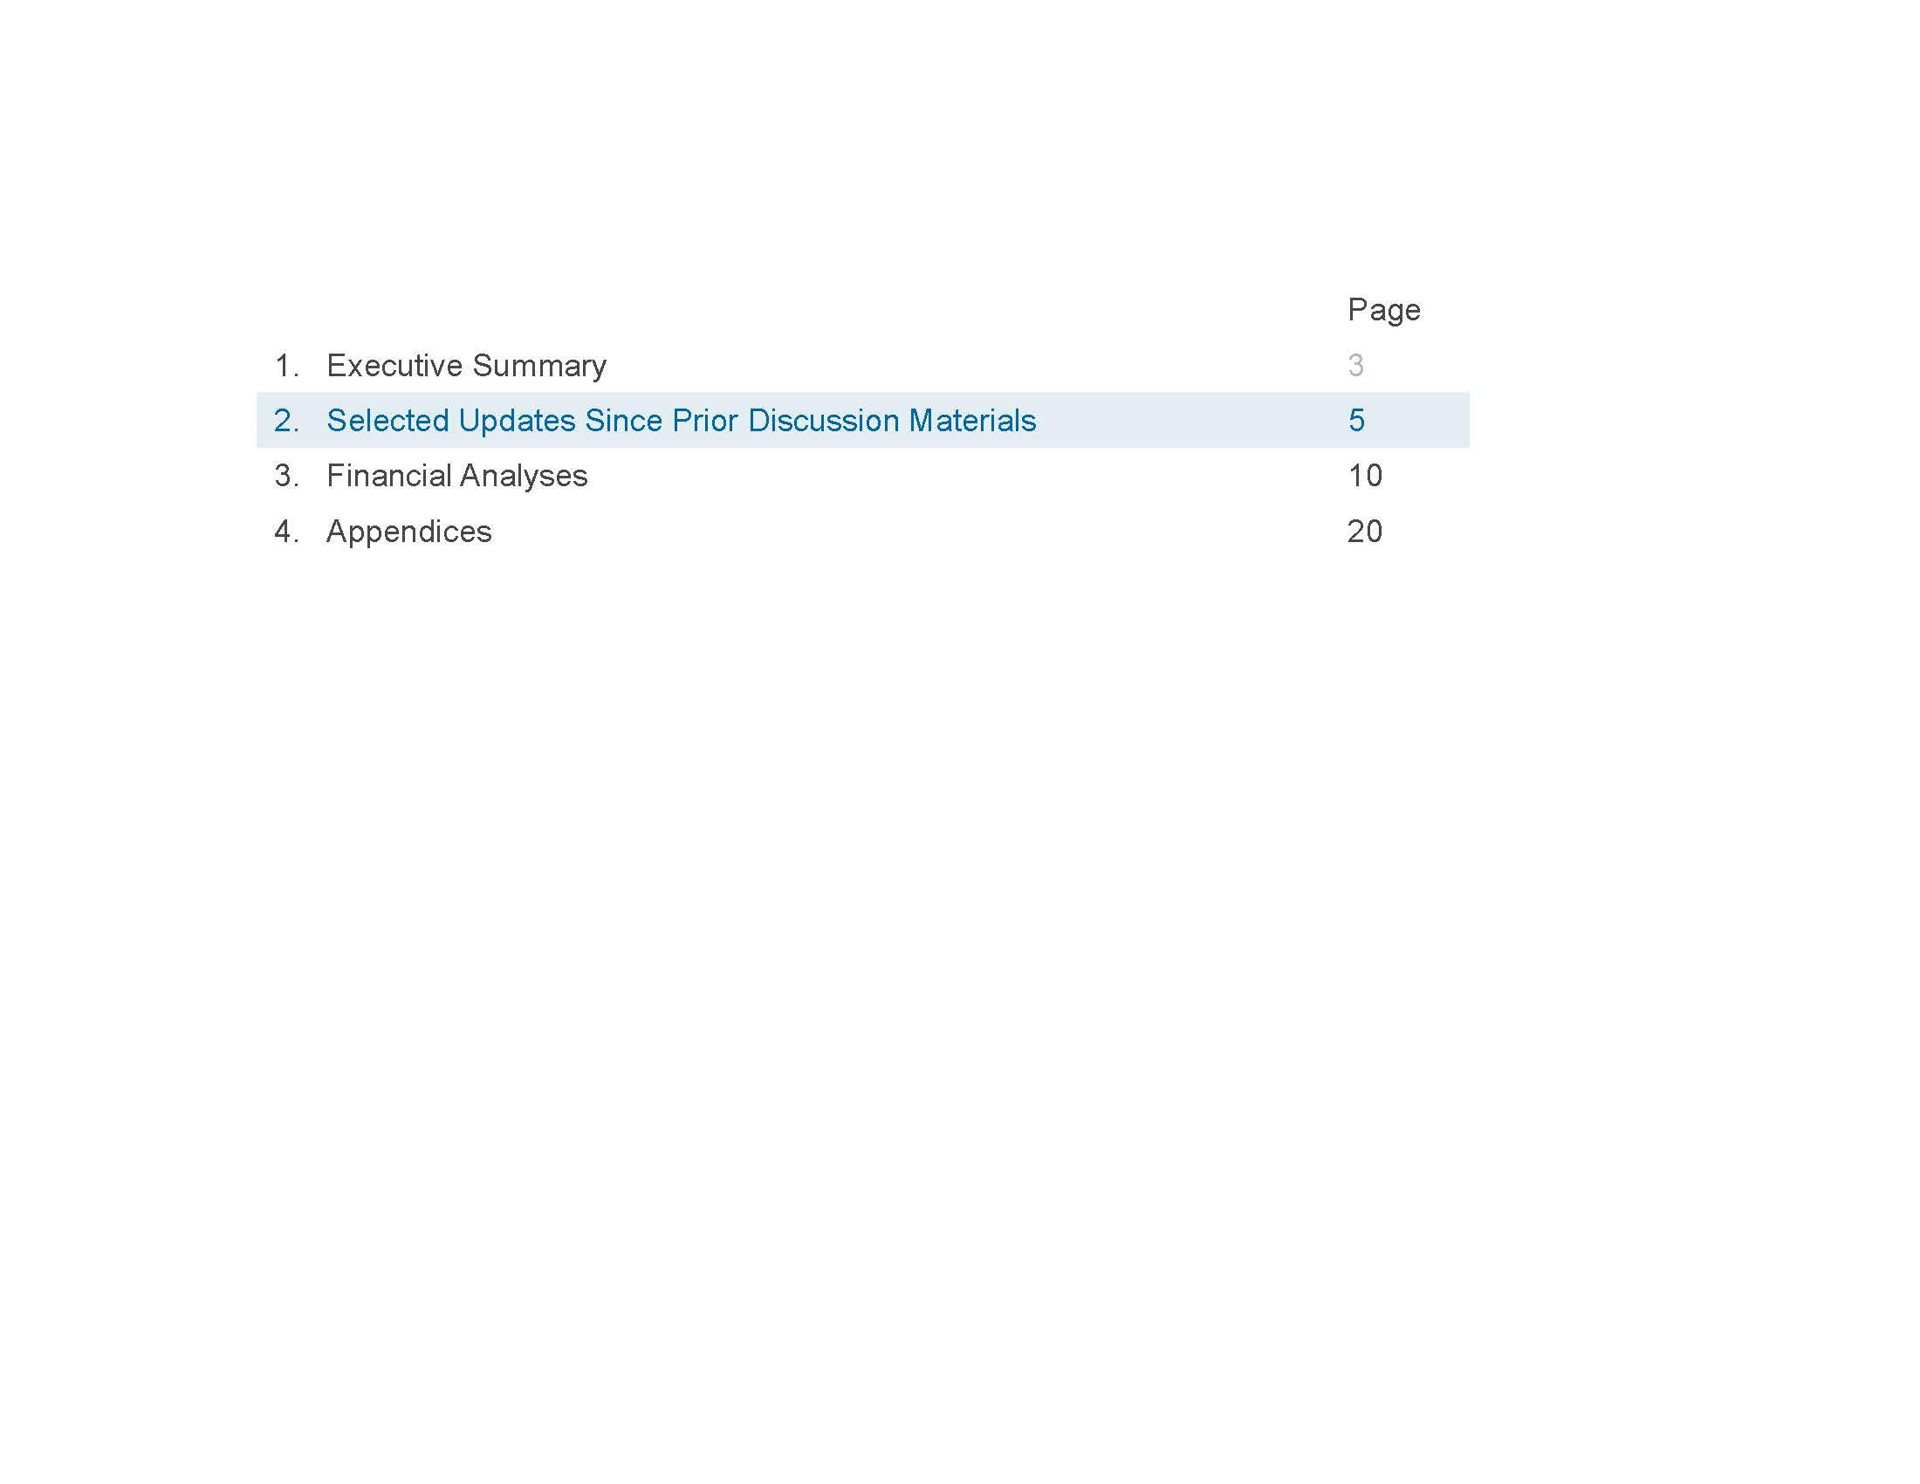 executive summary financial analyses selected updates since prior discussion materials appendices page | Houlihan Lokey